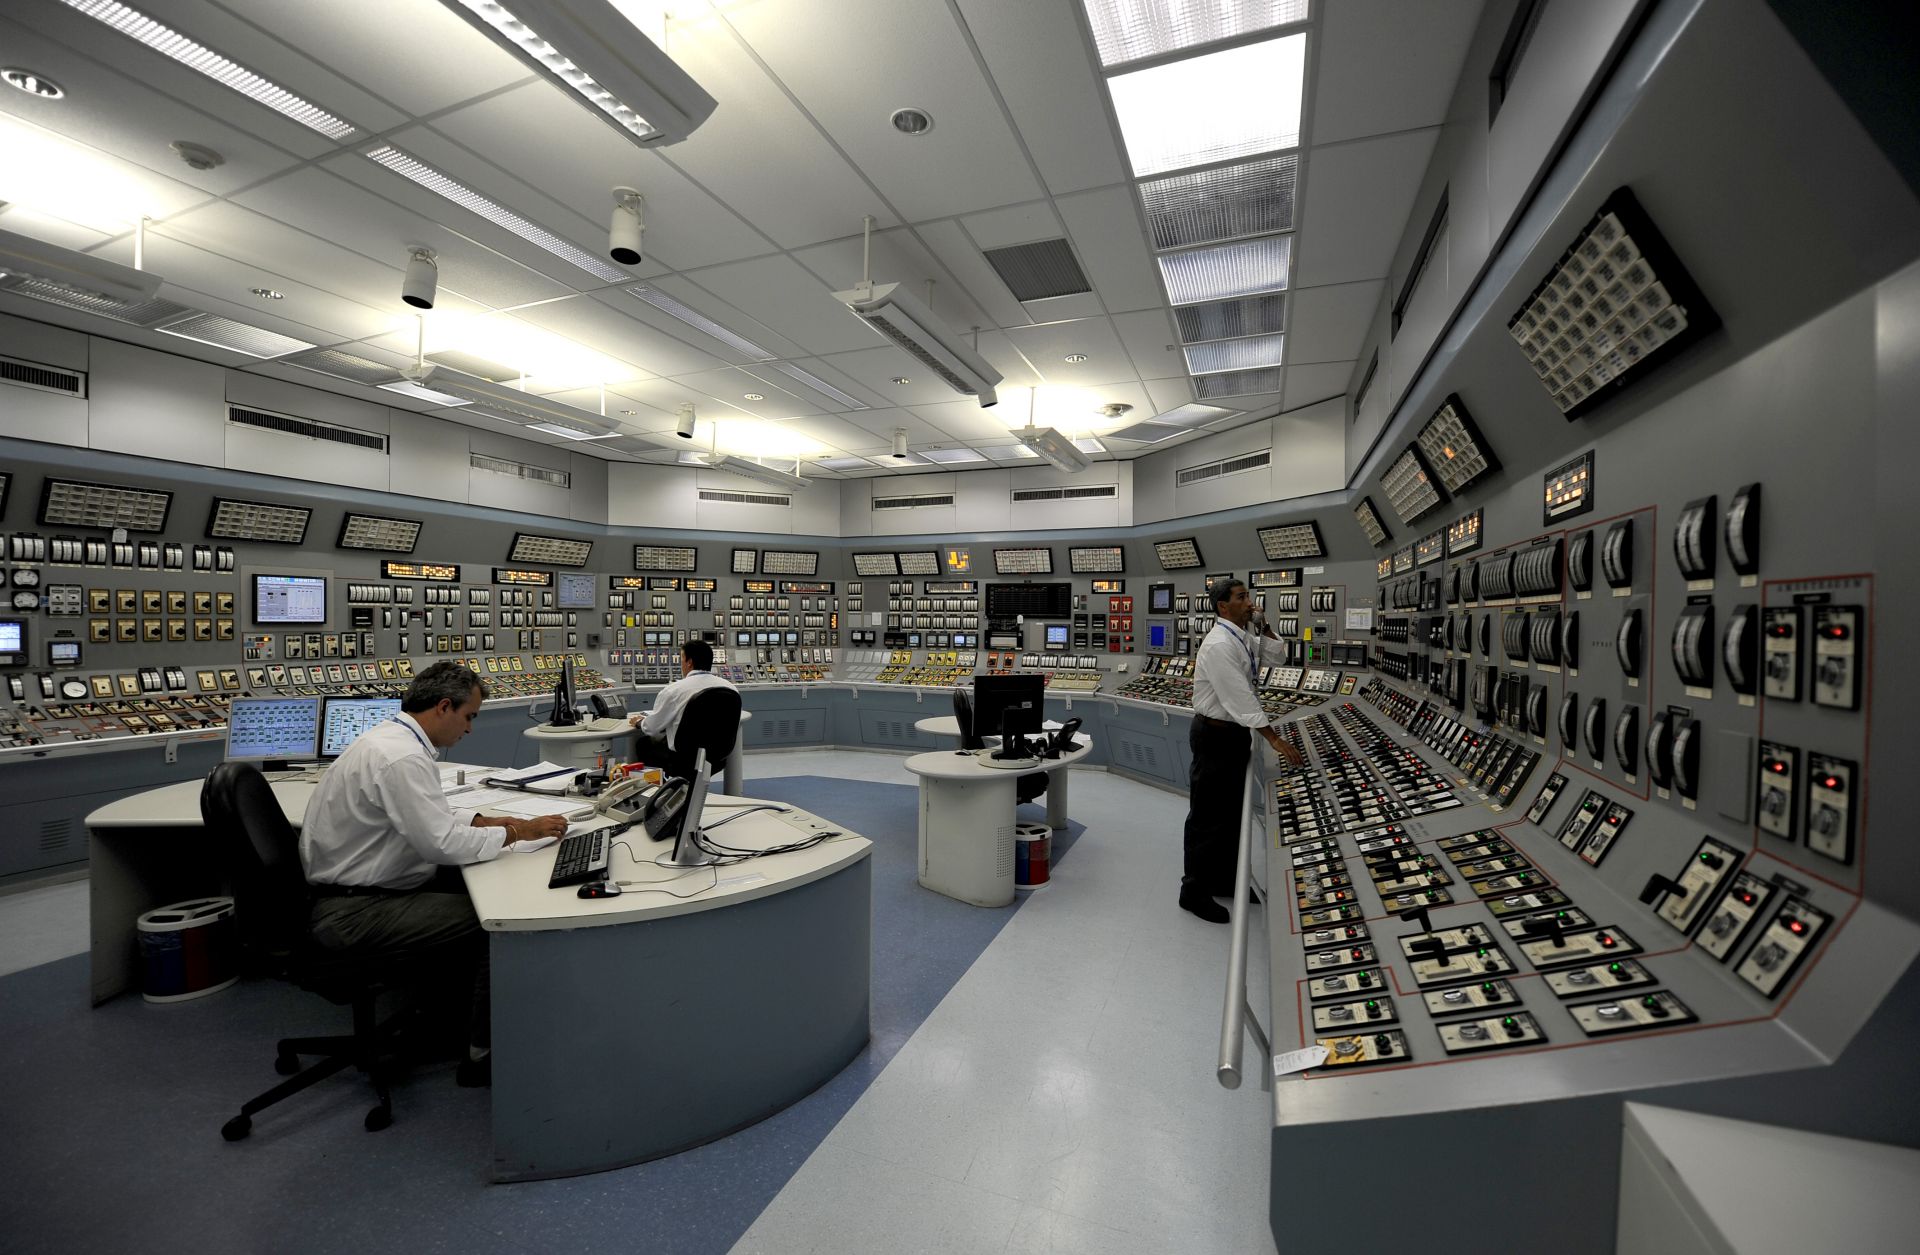 Specialists monitor dials in the control room of the Angra 1 nuclear plant in Angra dos Reis in Brazil's Rio de Janeiro state on April 12, 2011. 